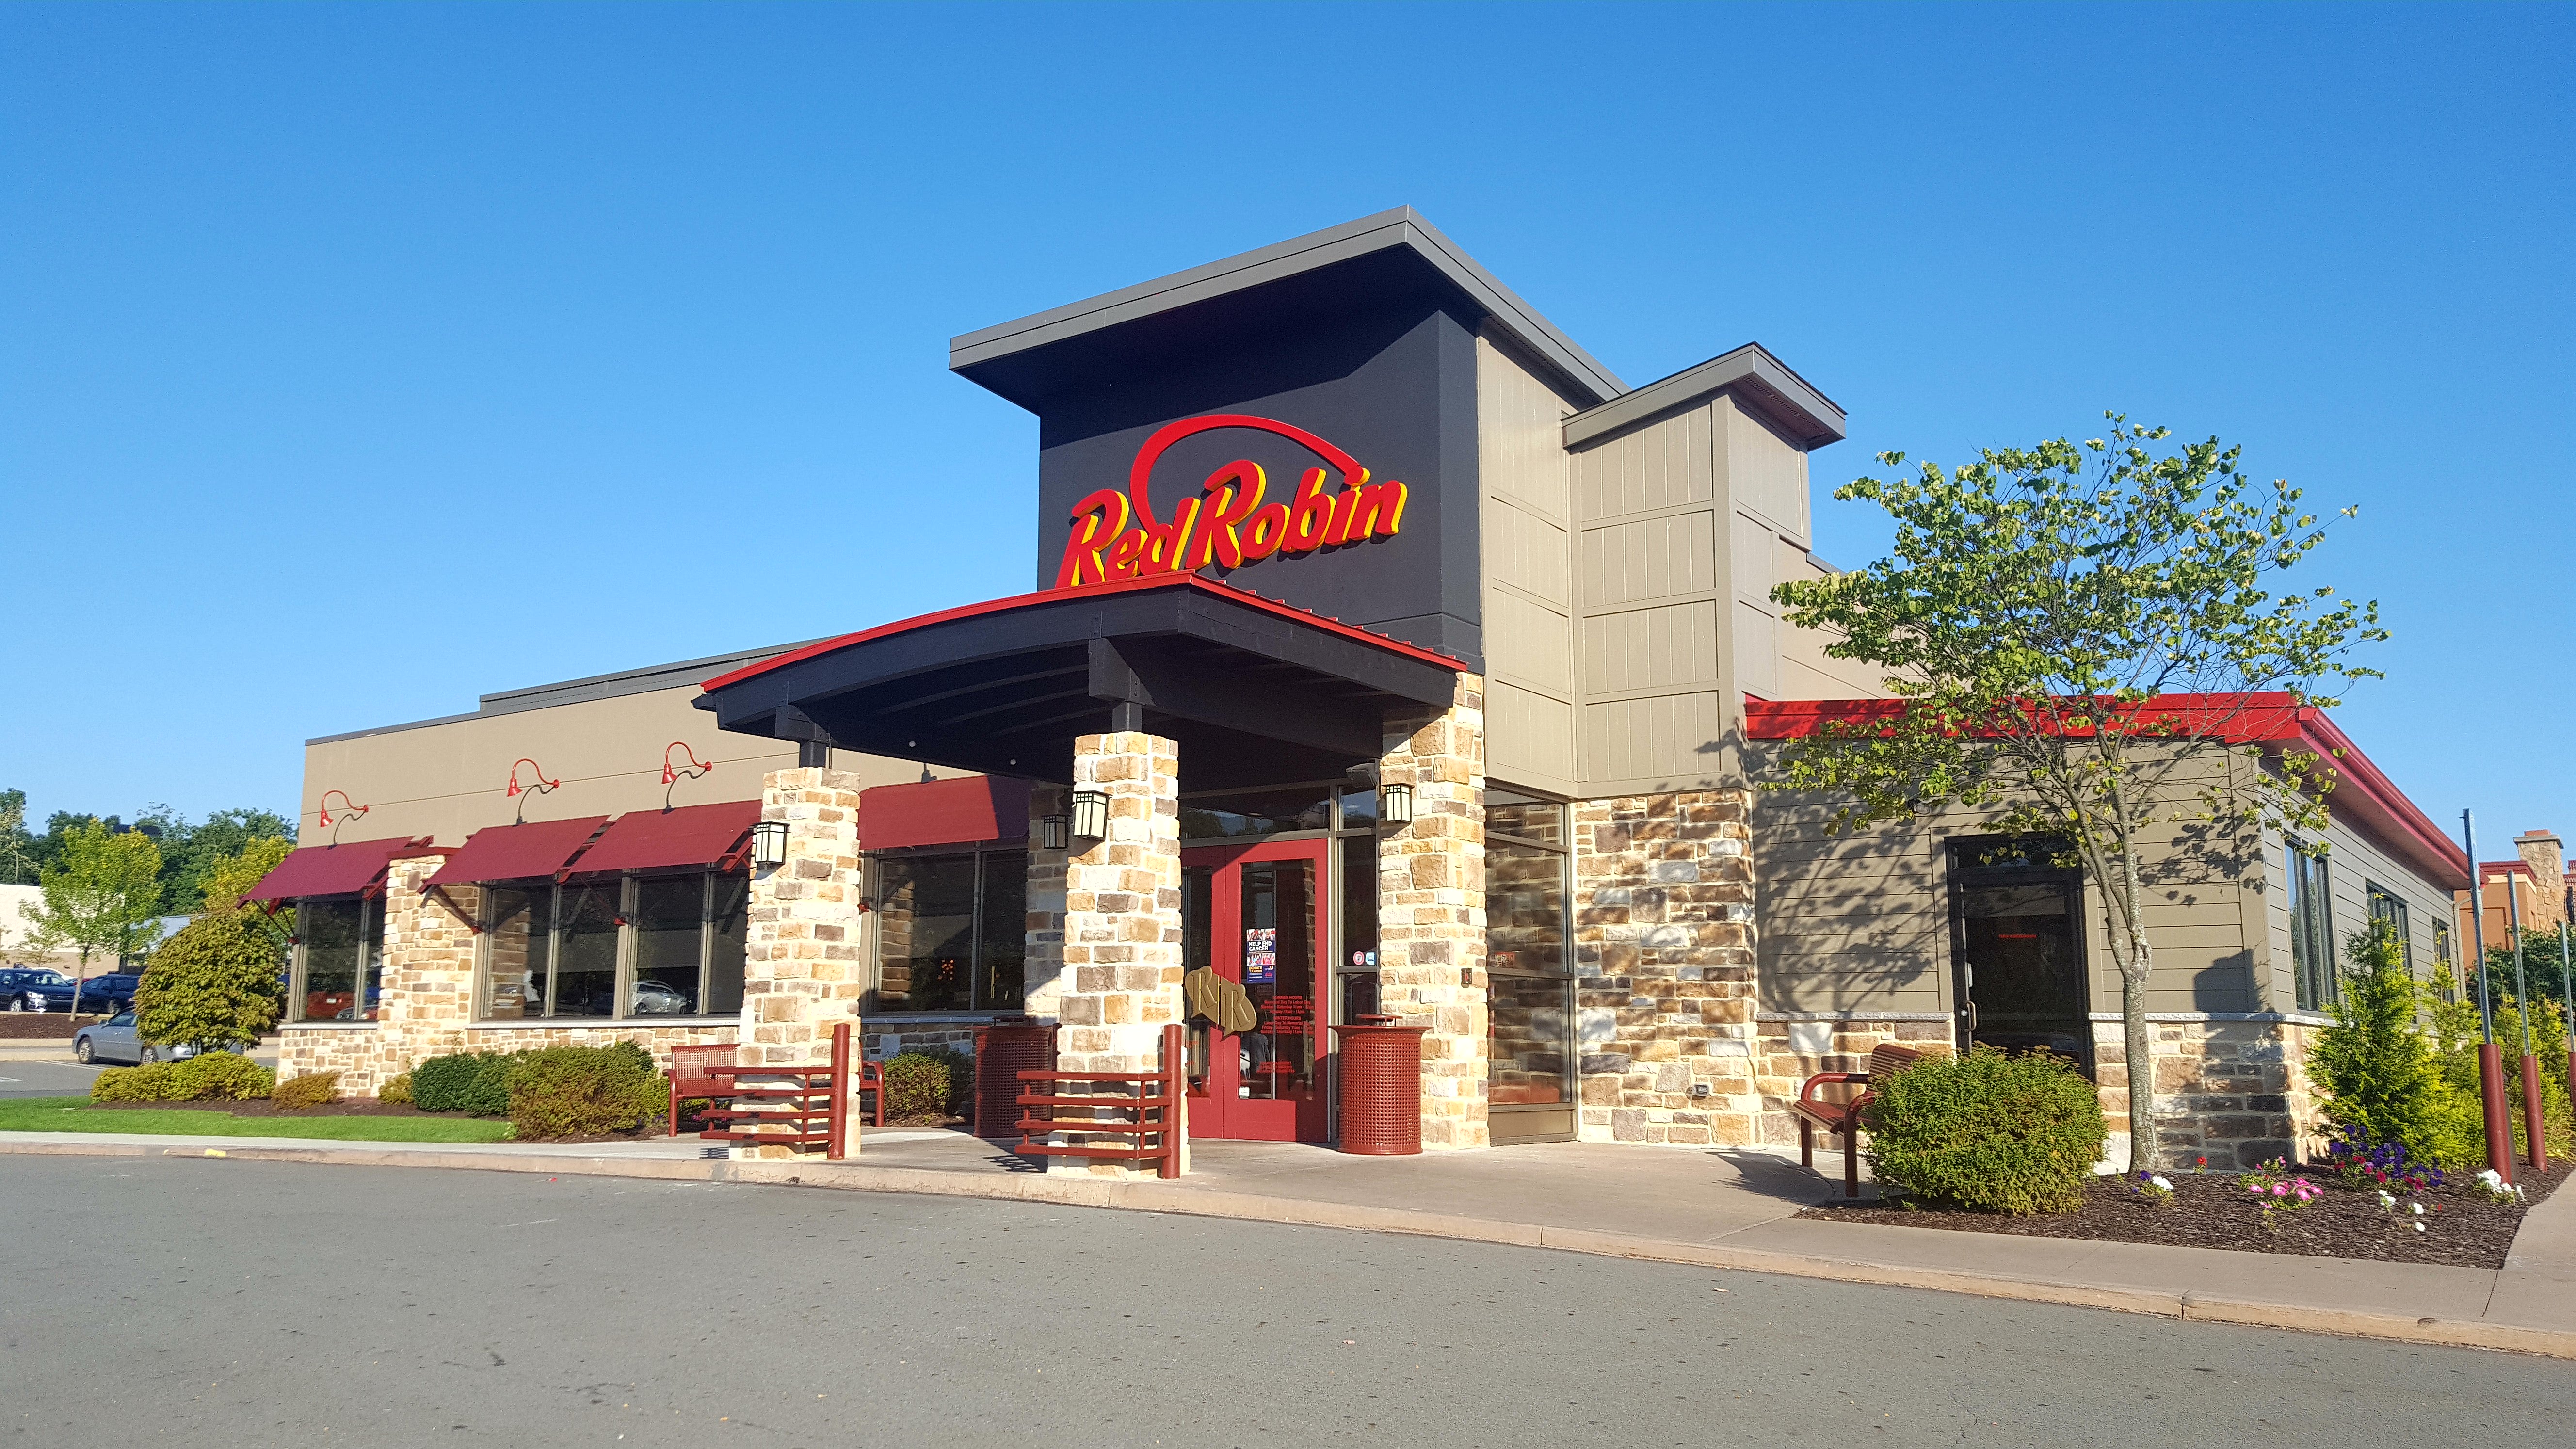 Image of the exterior of the Stroudsburg Red Robin location